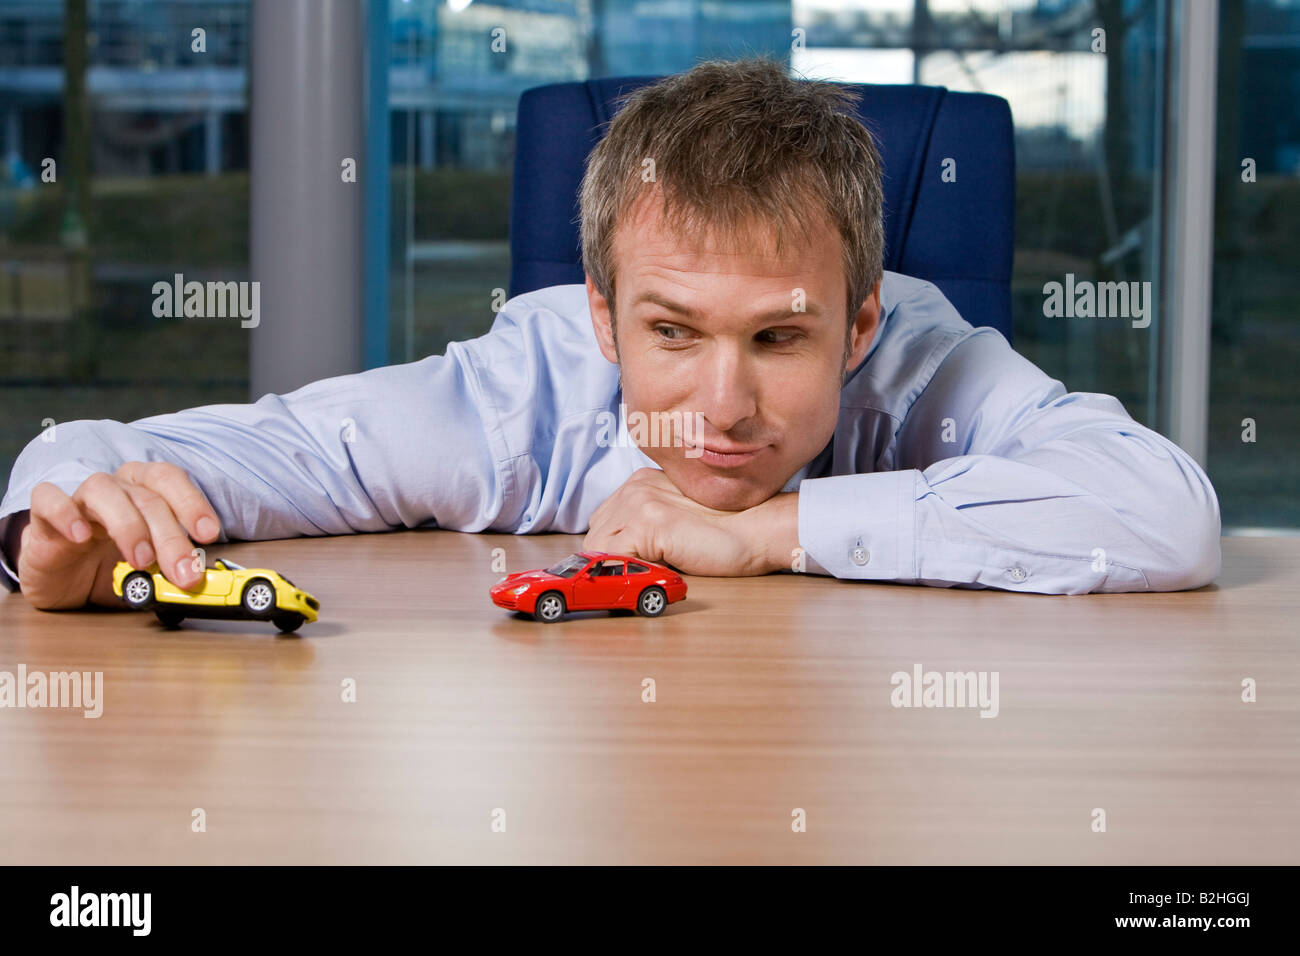 portrait of businessman playing with toy cars Stock Photo